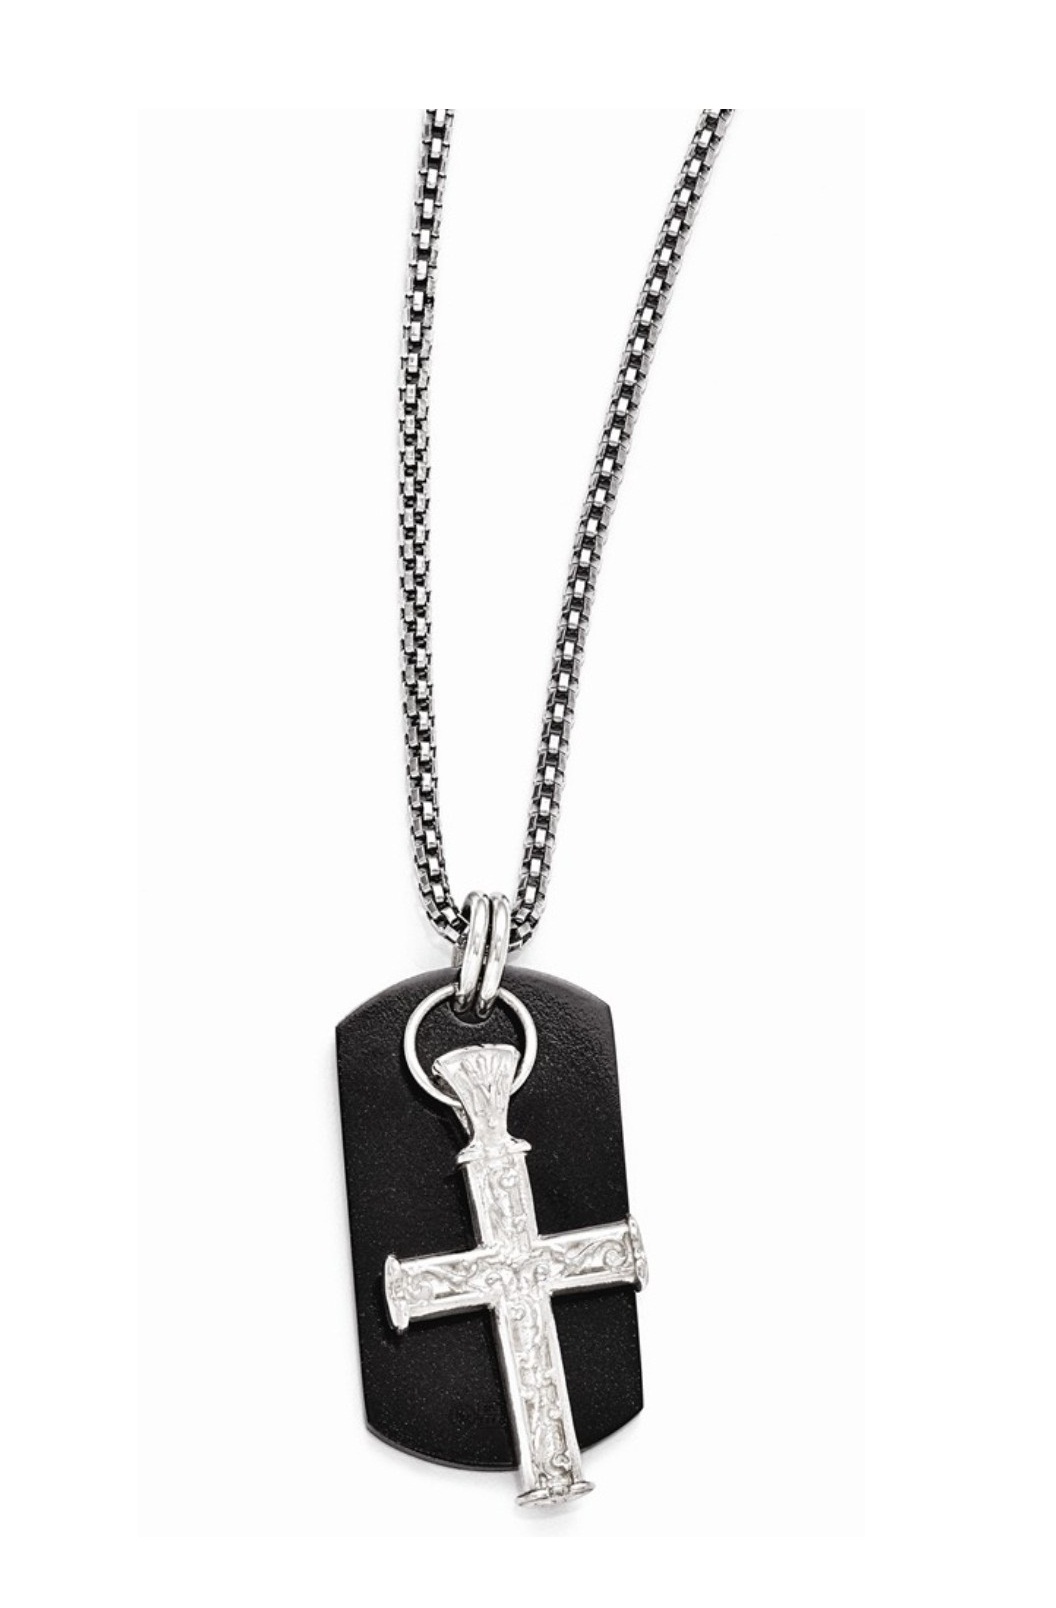  Black Ti And Sterling Silver Cross Pendant Necklace